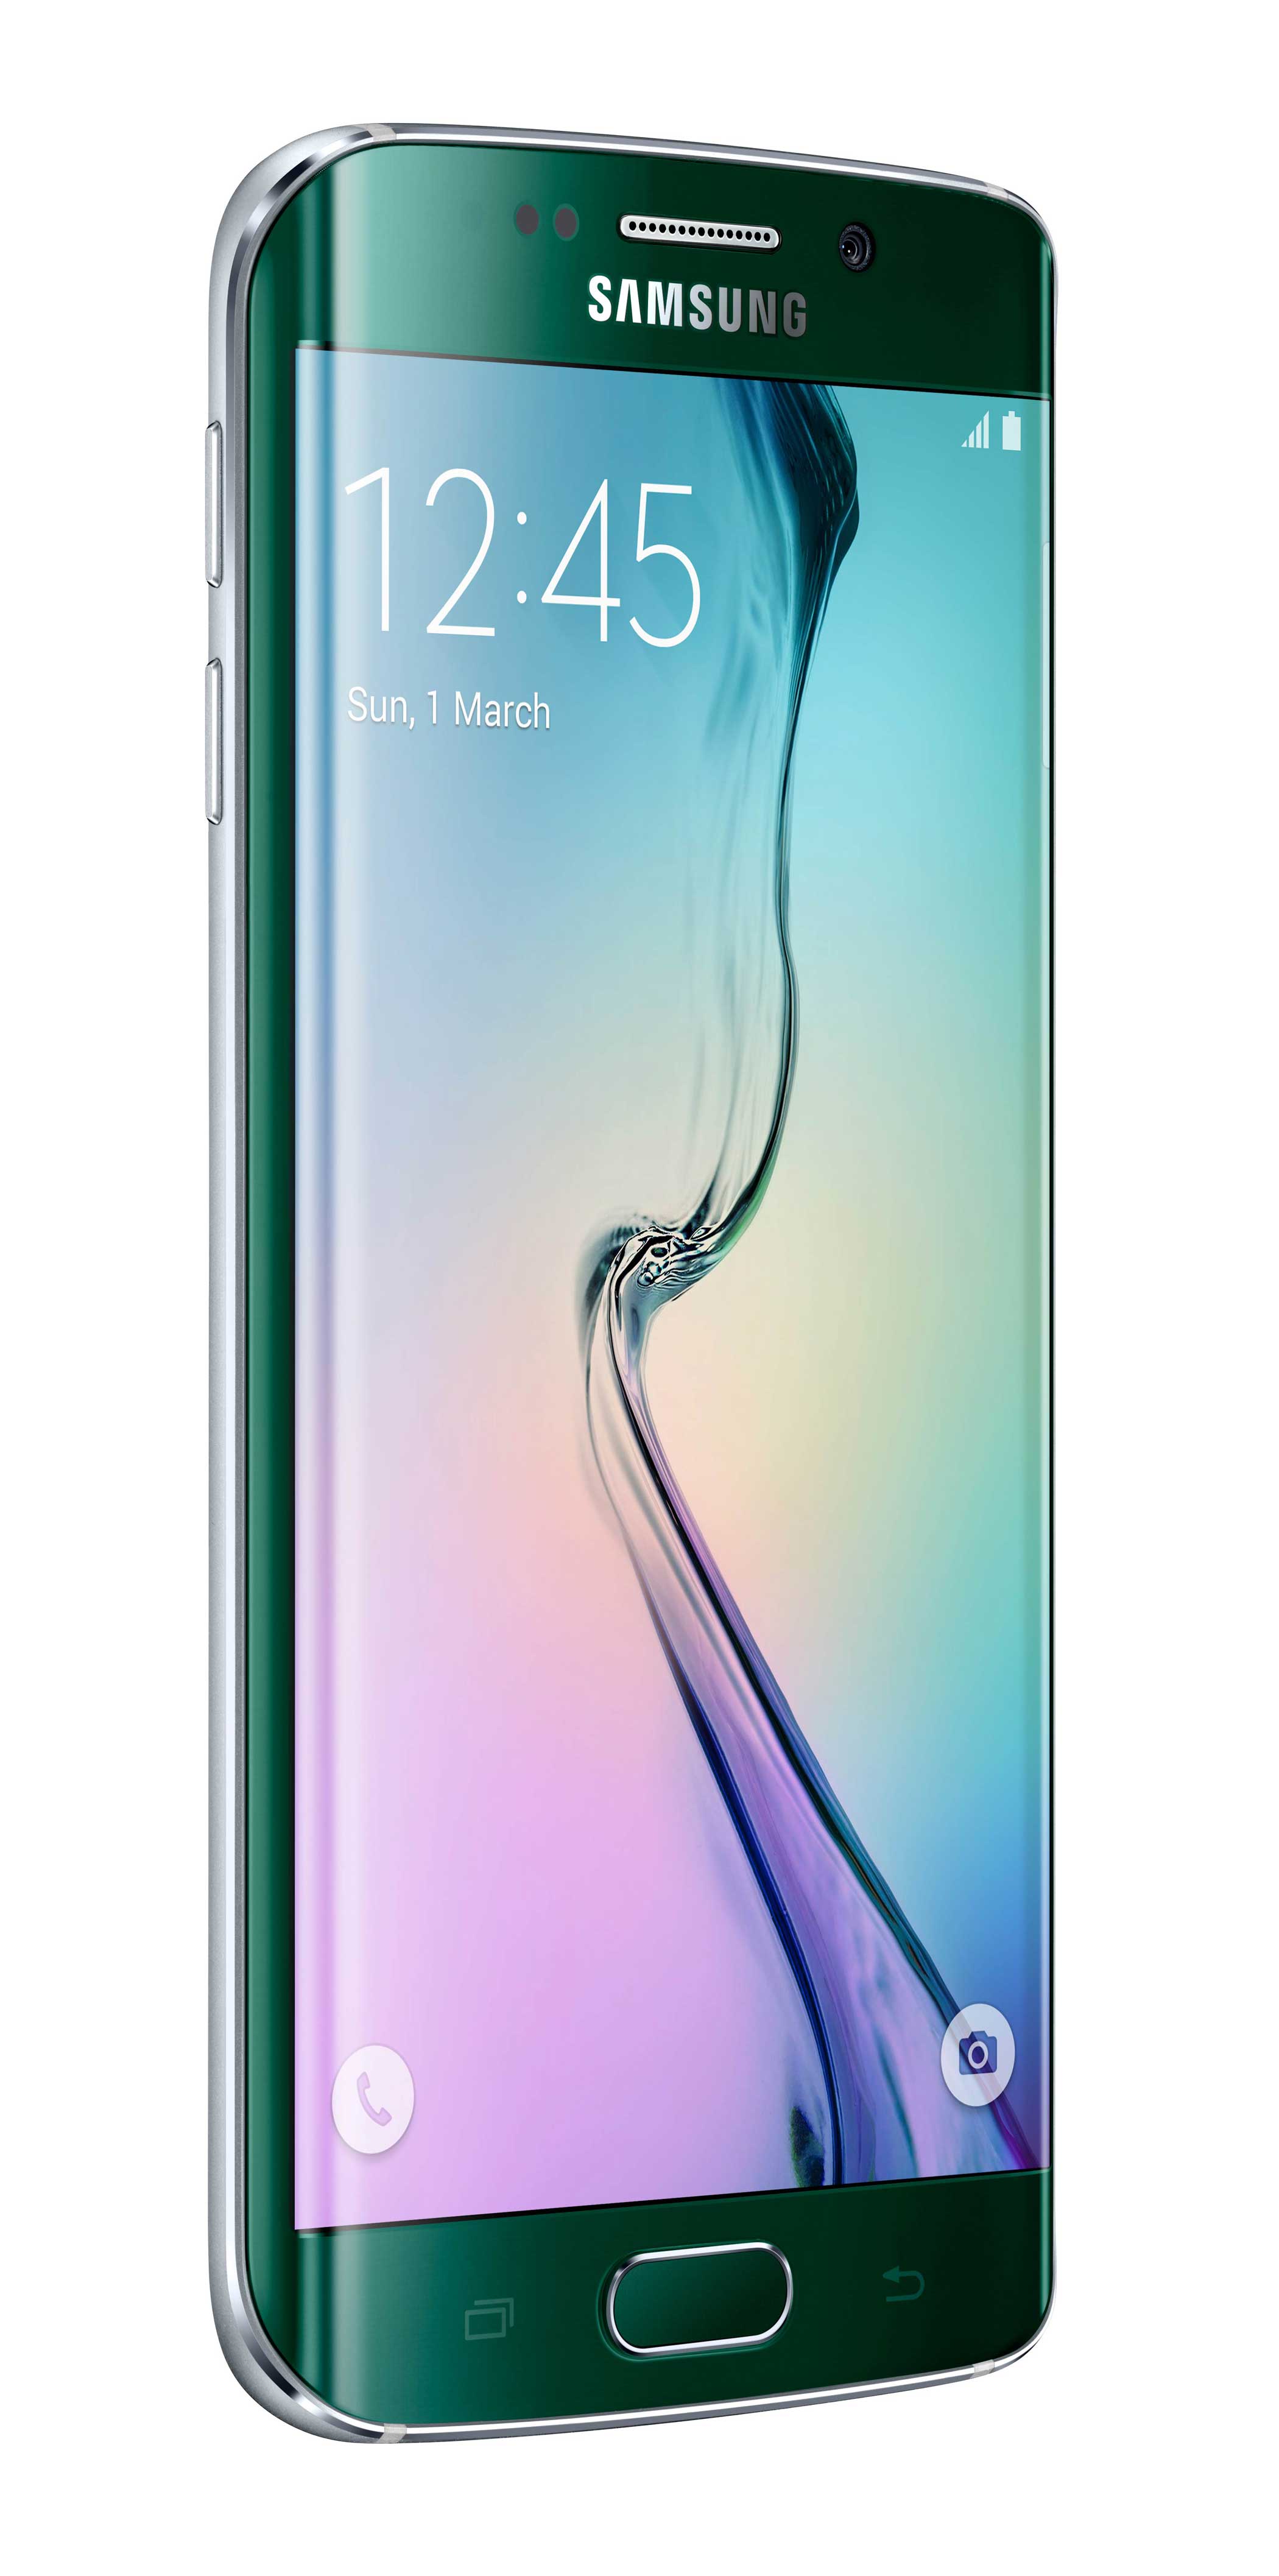 Galaxy S6 Edge: The S6 Edge features similar specs to the original S6 but comes with a stylish curved screen.